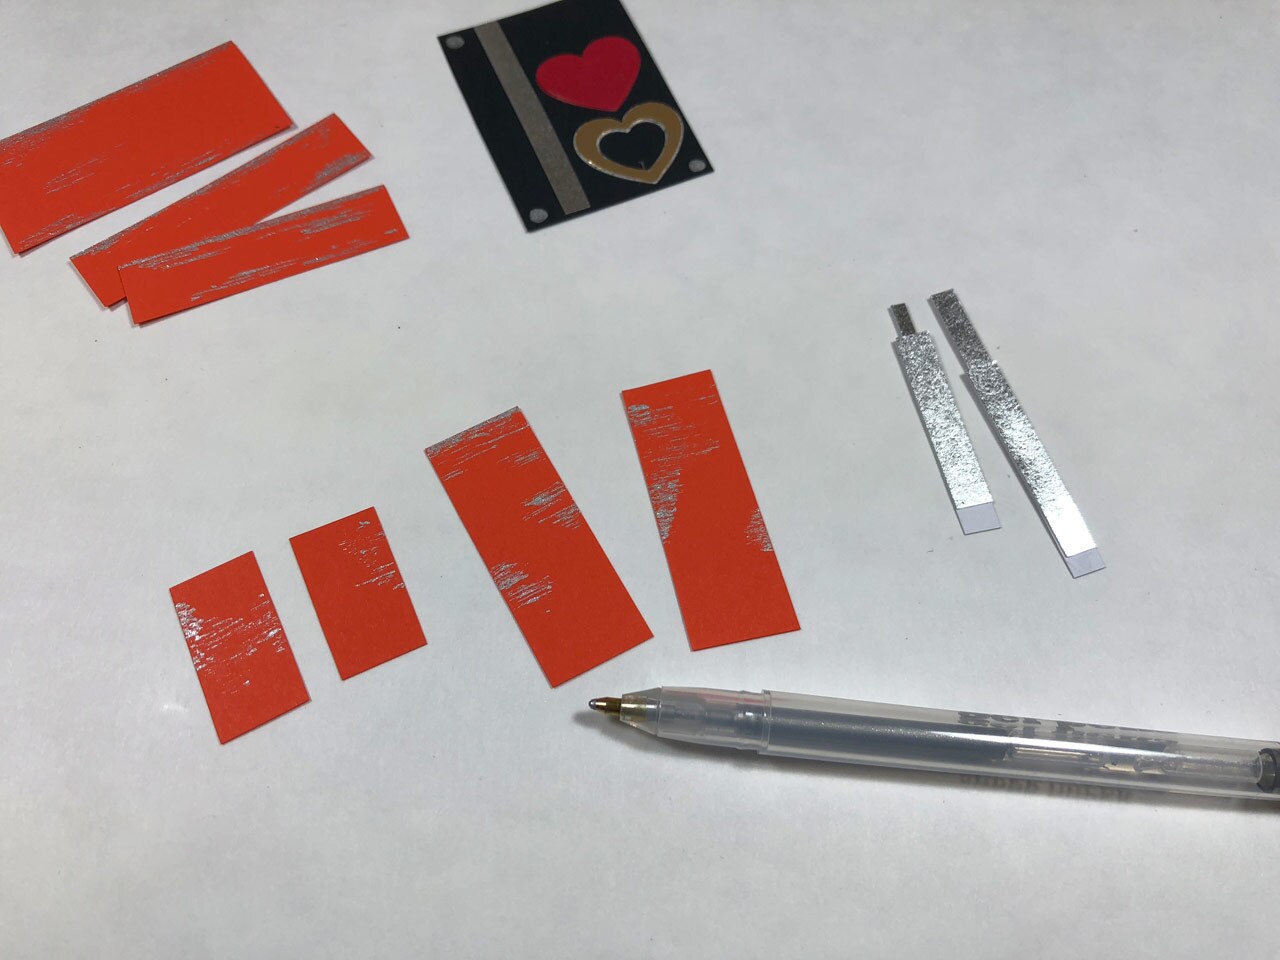 Strips of orange and silver metallic cardstock, black cardstock with red and gold paper hearts glued to it, and a silver gel pen. This is a Rose Tico-inspired Electro-Shock Prod Valentine's Day Card in progress.